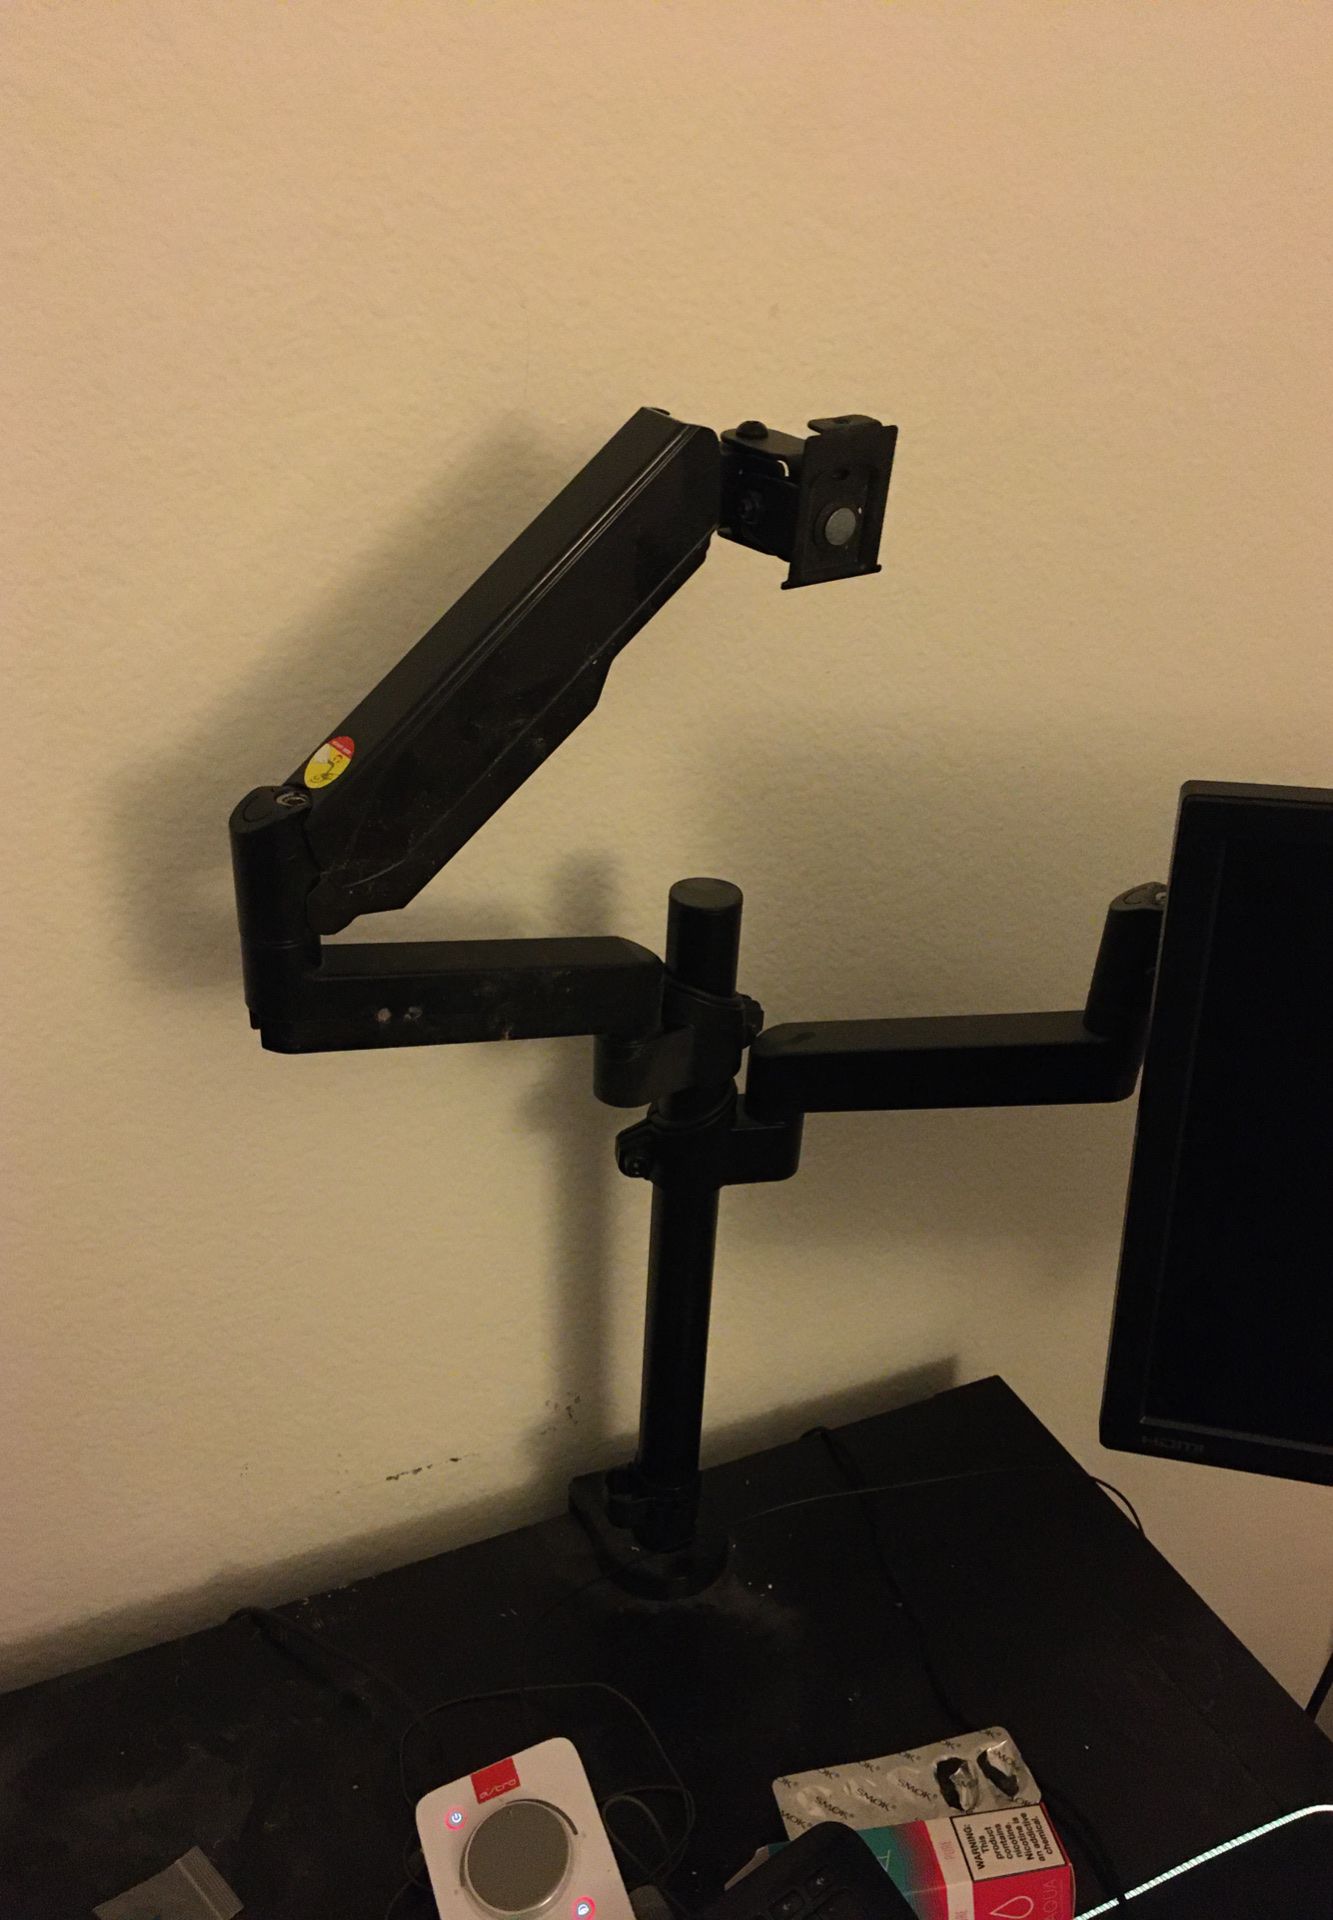 Dual computer monitor stand